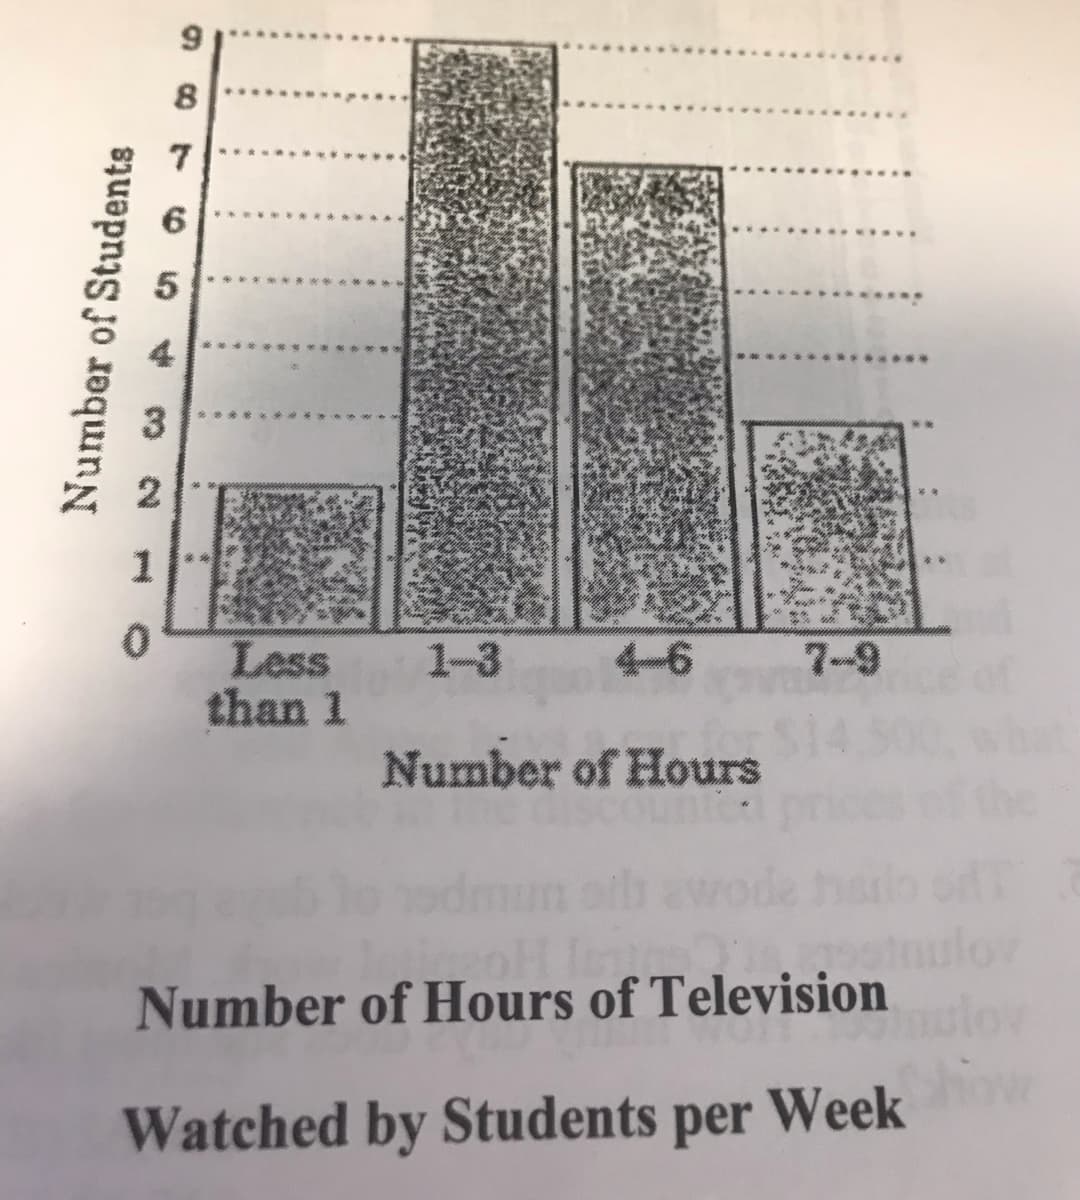 8
7-9
Less
than 1
1-3
4-6
Number of Hours
Number of Hours of Television
Watched by Students per Week
Number of Students
543 210
